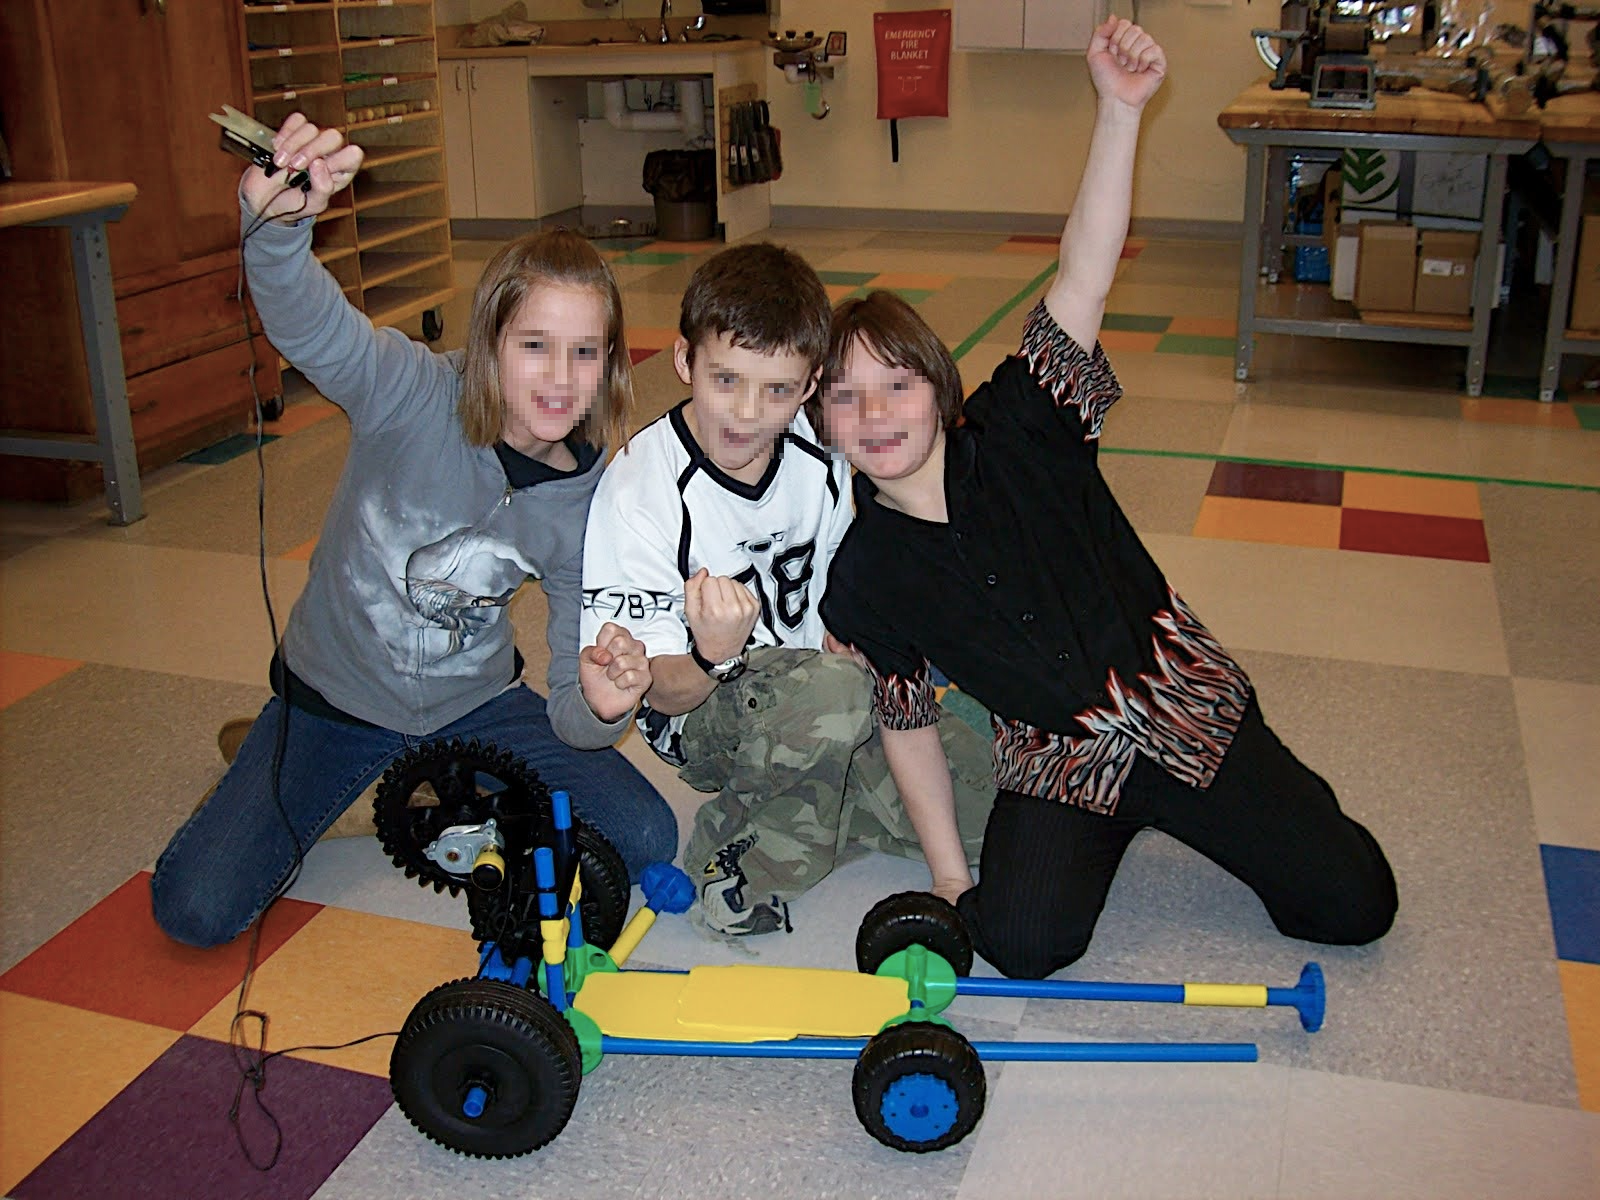 Students Cheering winning race after building toy car